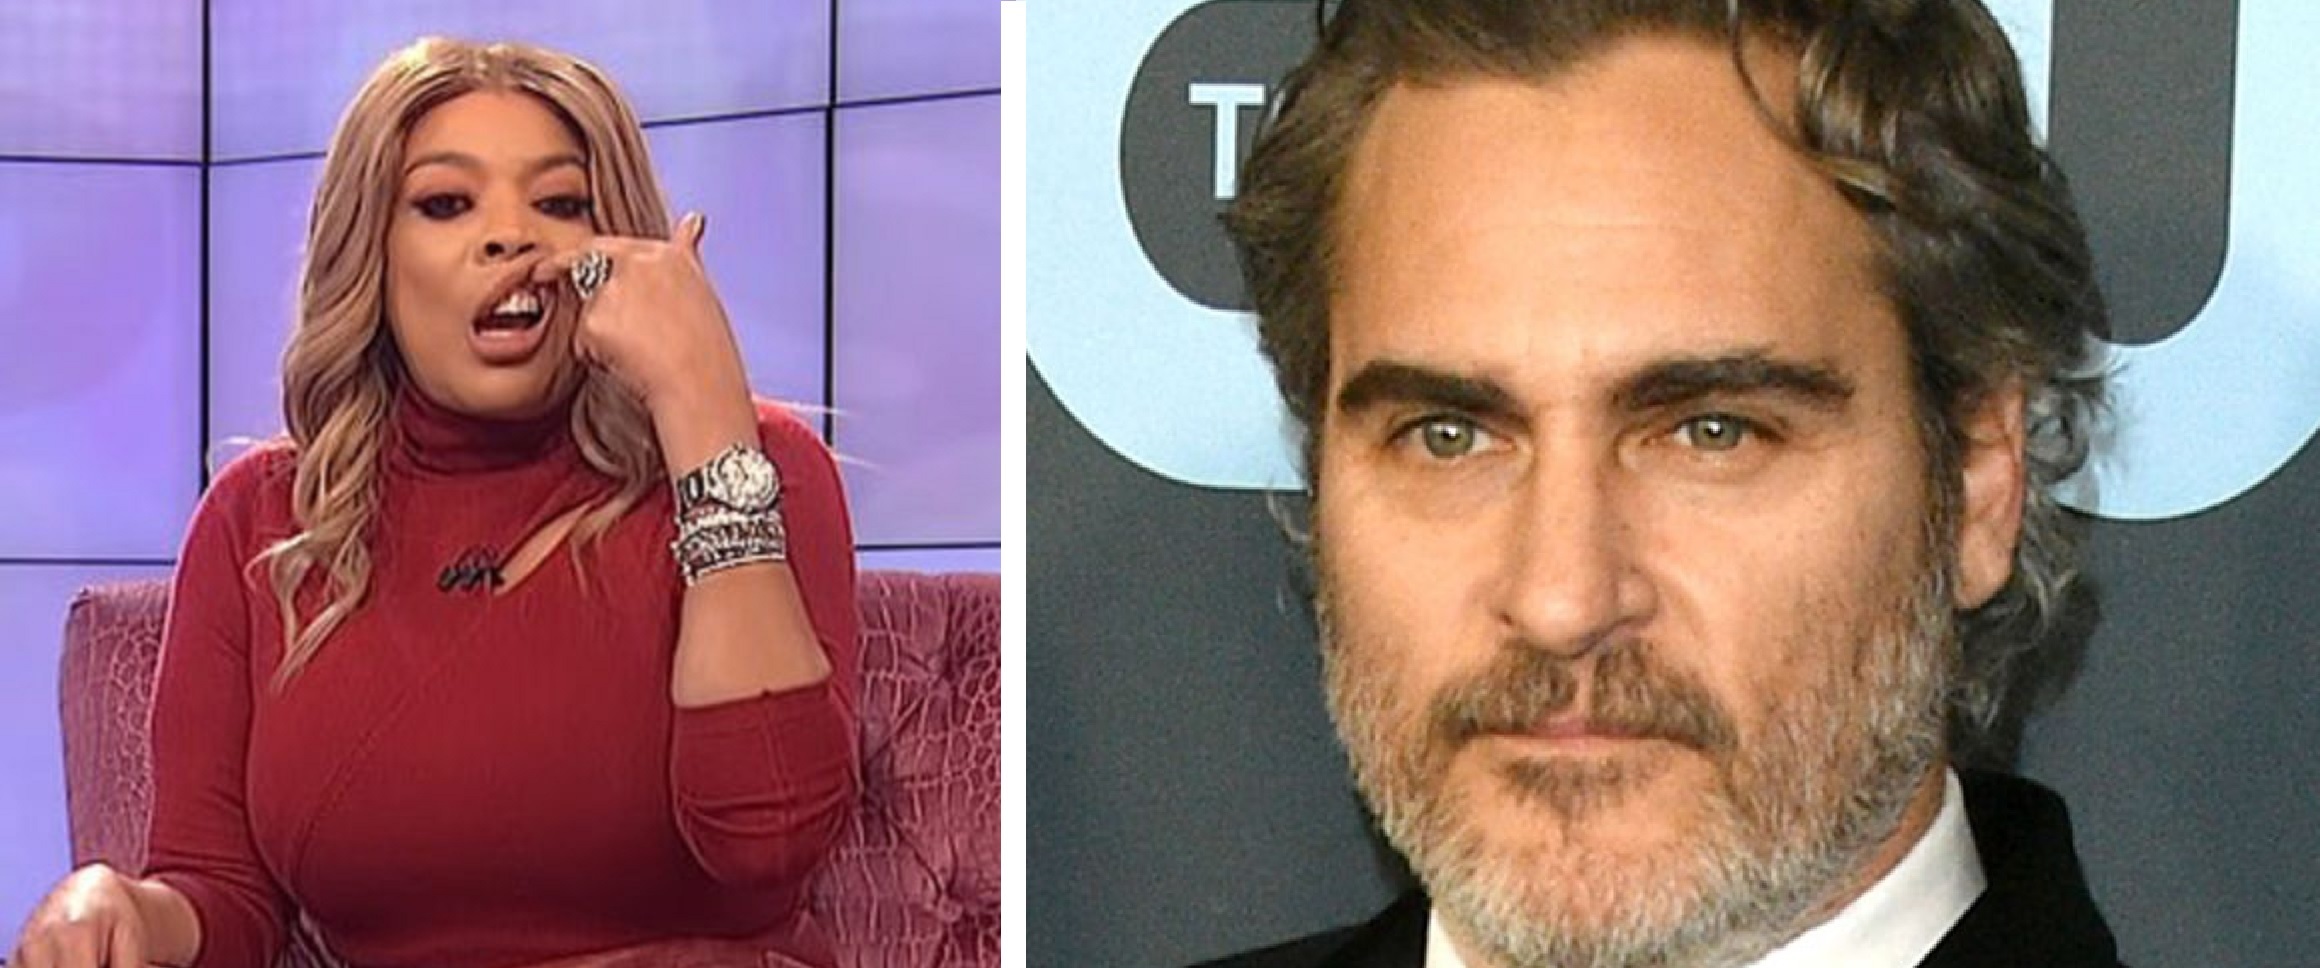 Wendy Williams Apologizes To Joaquin Phoenix After Making Fun Of His Cleft Lip